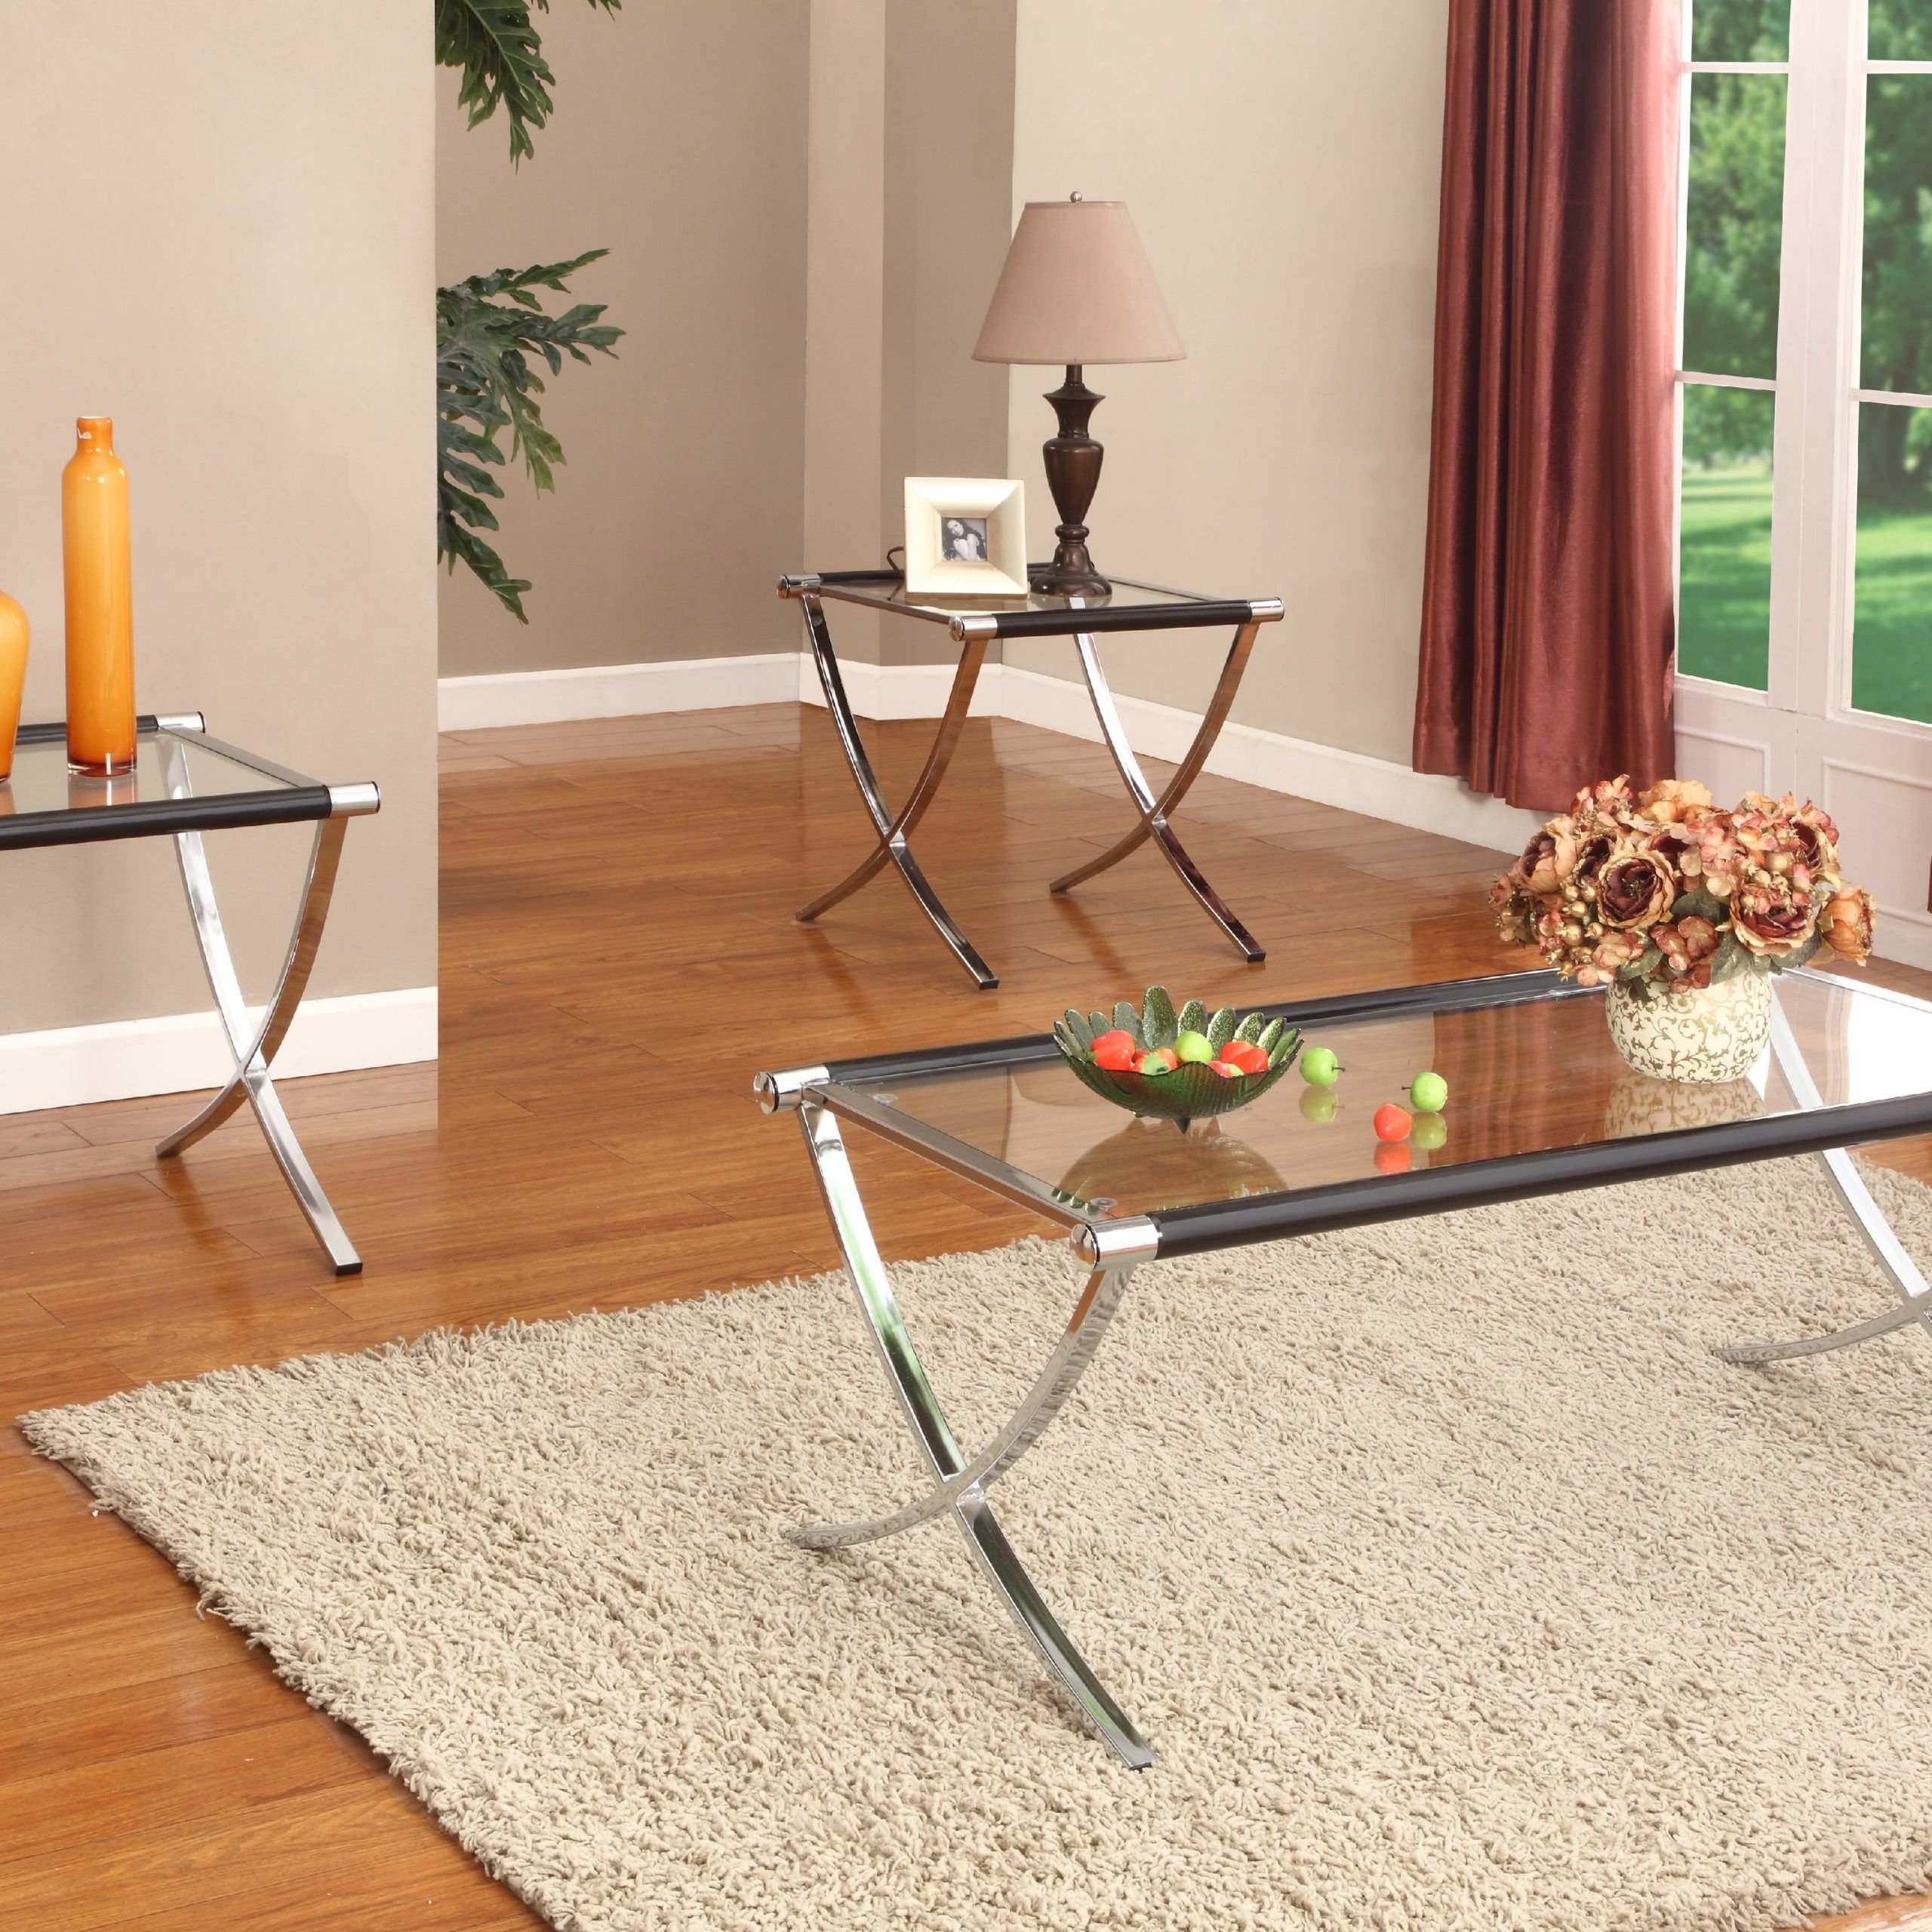 Peggie 3 Piece Coffee Table Set, Chrome Metal Frame & Tempered Glass With Well Known Glass Top Coffee Tables (View 4 of 15)